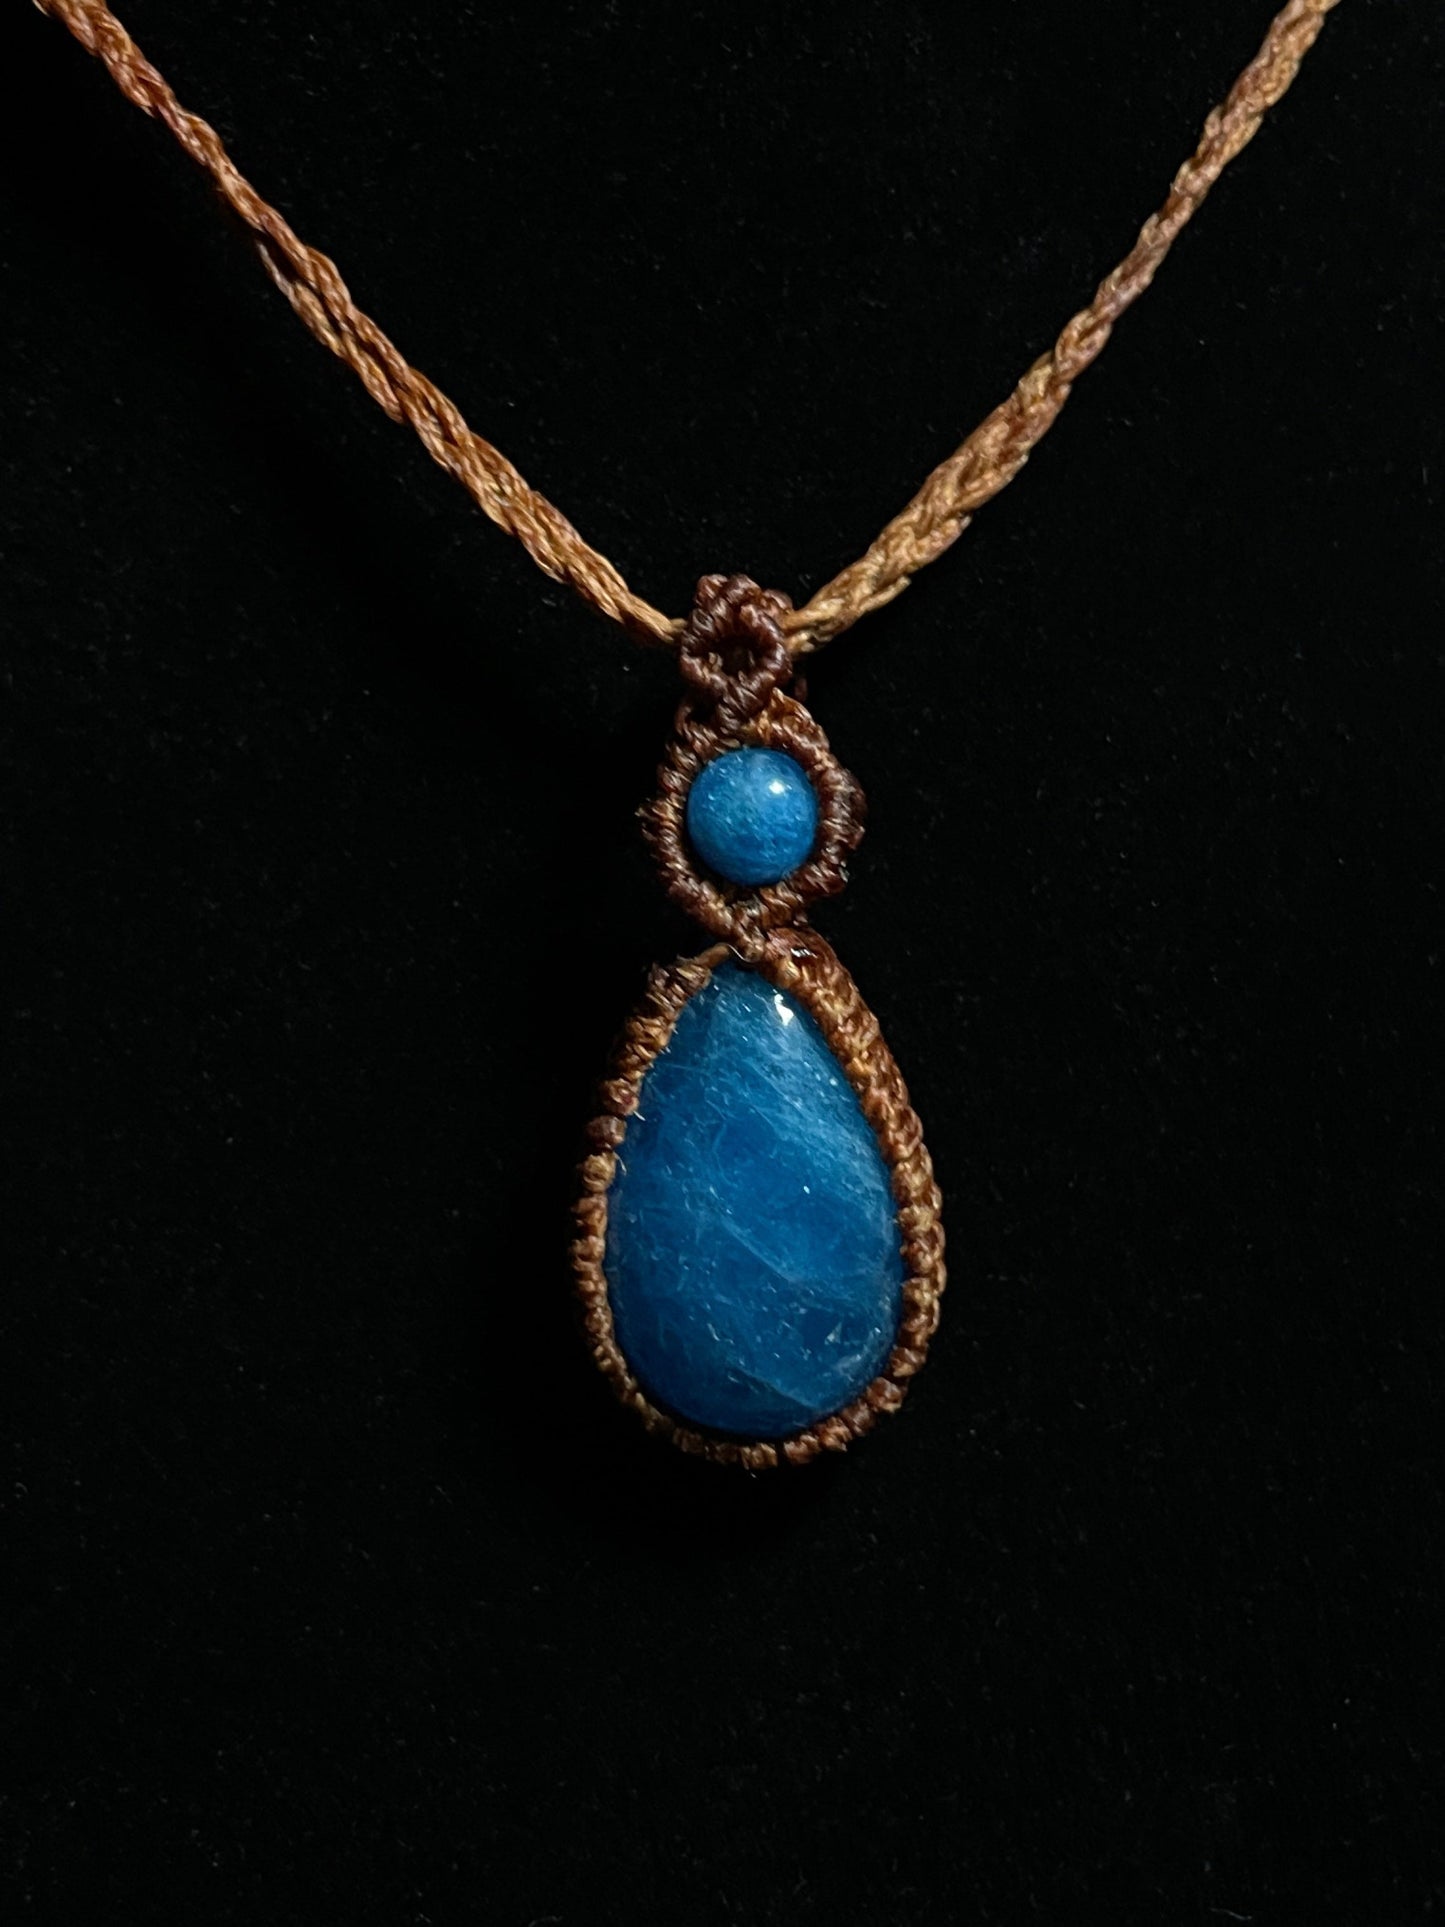 Pictured is a blue apatite cabochon wrapped in macrame thread. A gothic book and flowers are nearby.